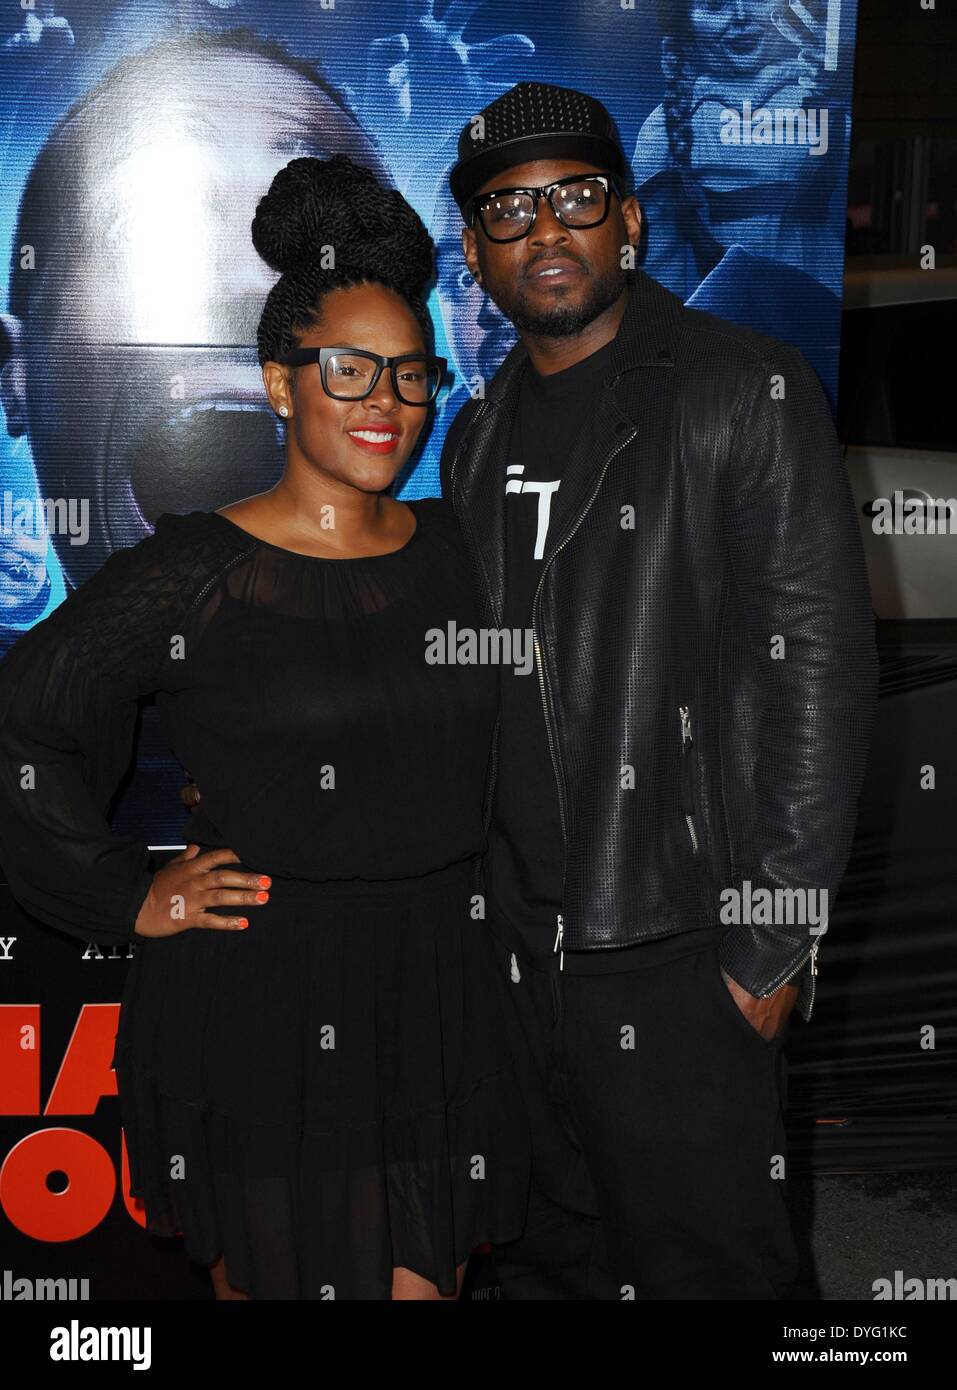 Los Angeles, CA, USA. 16th Apr, 2014. Omar Epps, Keisha Epps at arrivals for A HAUNTED HOUSE Premiere, Regal Cinemas LA Live, Los Angeles, CA April 16, 2014. Credit:  Dee Cercone/Everett Collection/Alamy Live News Stock Photo